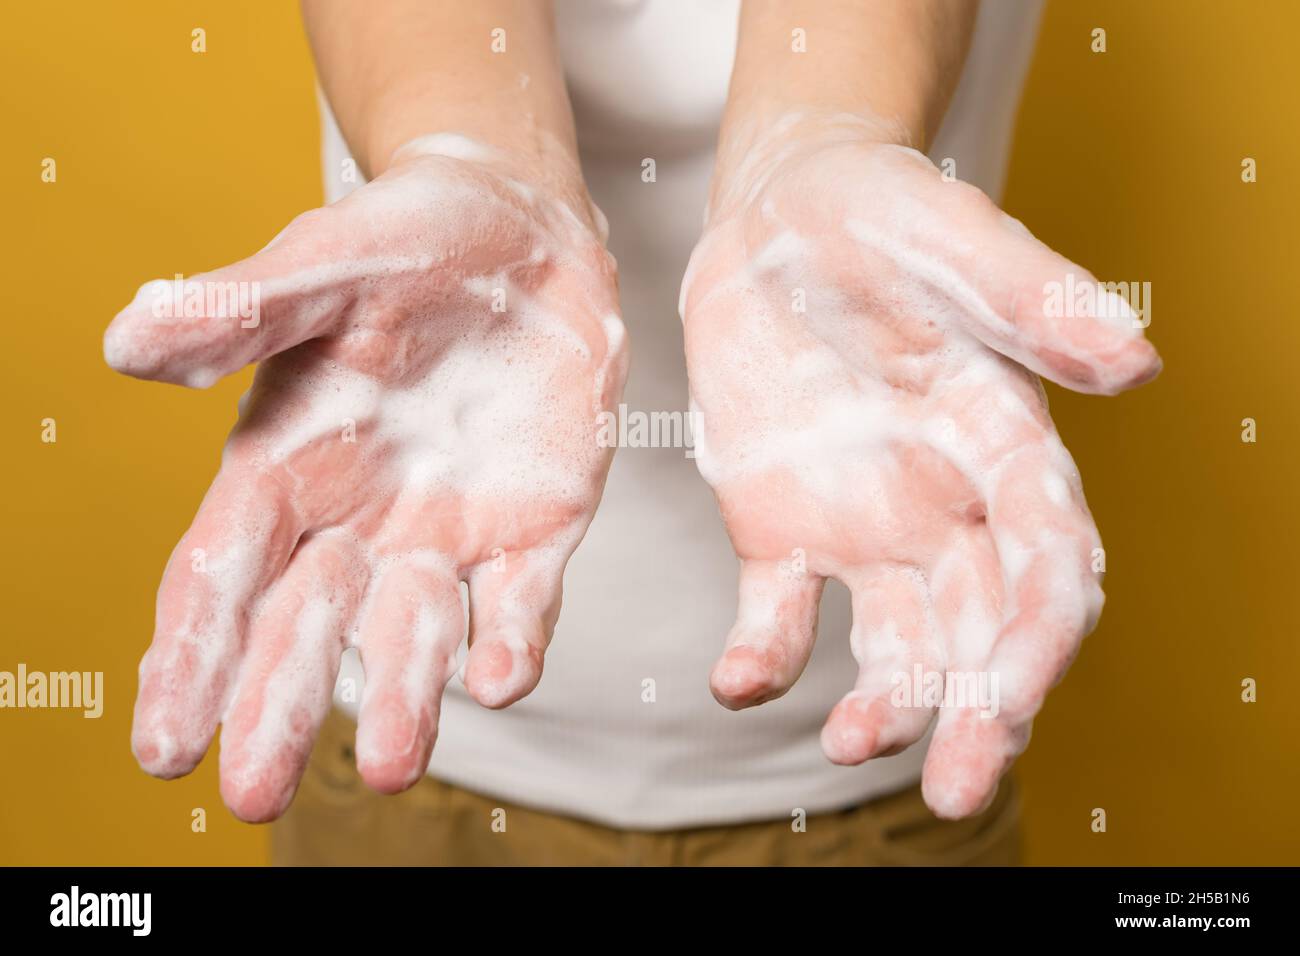 Woman shows her hands in soapy suds, on a yellow background. Concept for an effective way to prevent the spread of infections. Close-up. Stock Photo